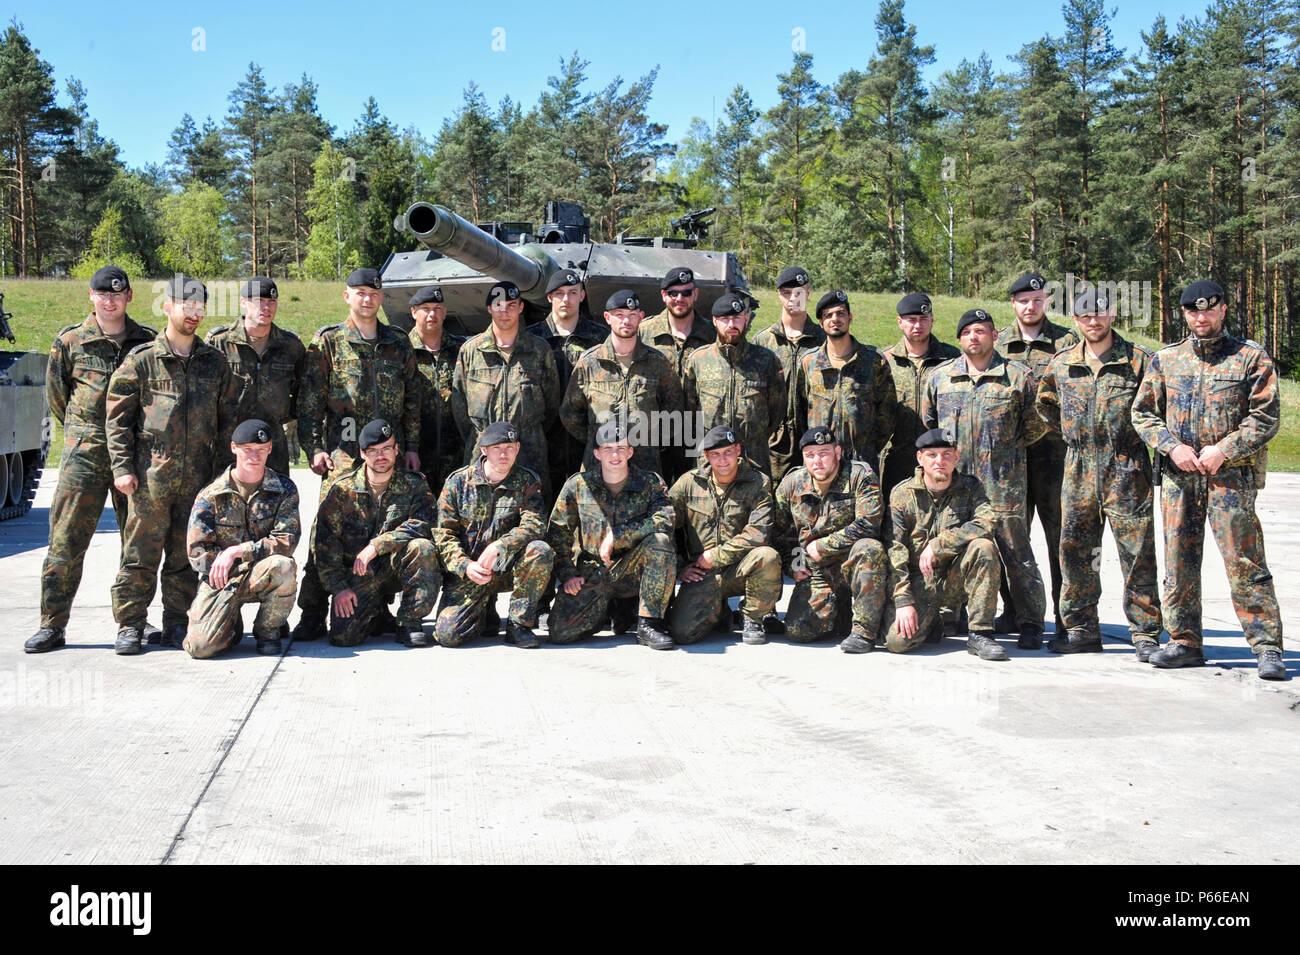 Soldiers from Germany participating in the Strong Europe Tank Challenge (SETC) pose for a group photo May 08, 2016 at Grafenwoehr Training Area, Germany. The SETC is co-hosted by U.S. Army Europe and the German Bundeswehr May 10-13, 2016. The competition is designed to foster military partnership while promoting NATO interoperability. Seven platoons from six NATO nations are competing in SETC - the first multinational tank challenge at Grafenwoehr in 25 years. For more photos, videos and stories from the Strong Europe Tank Challenge, go to http://www.eur.army.mil/tankchallenge/ (U.S. Army phot Stock Photo